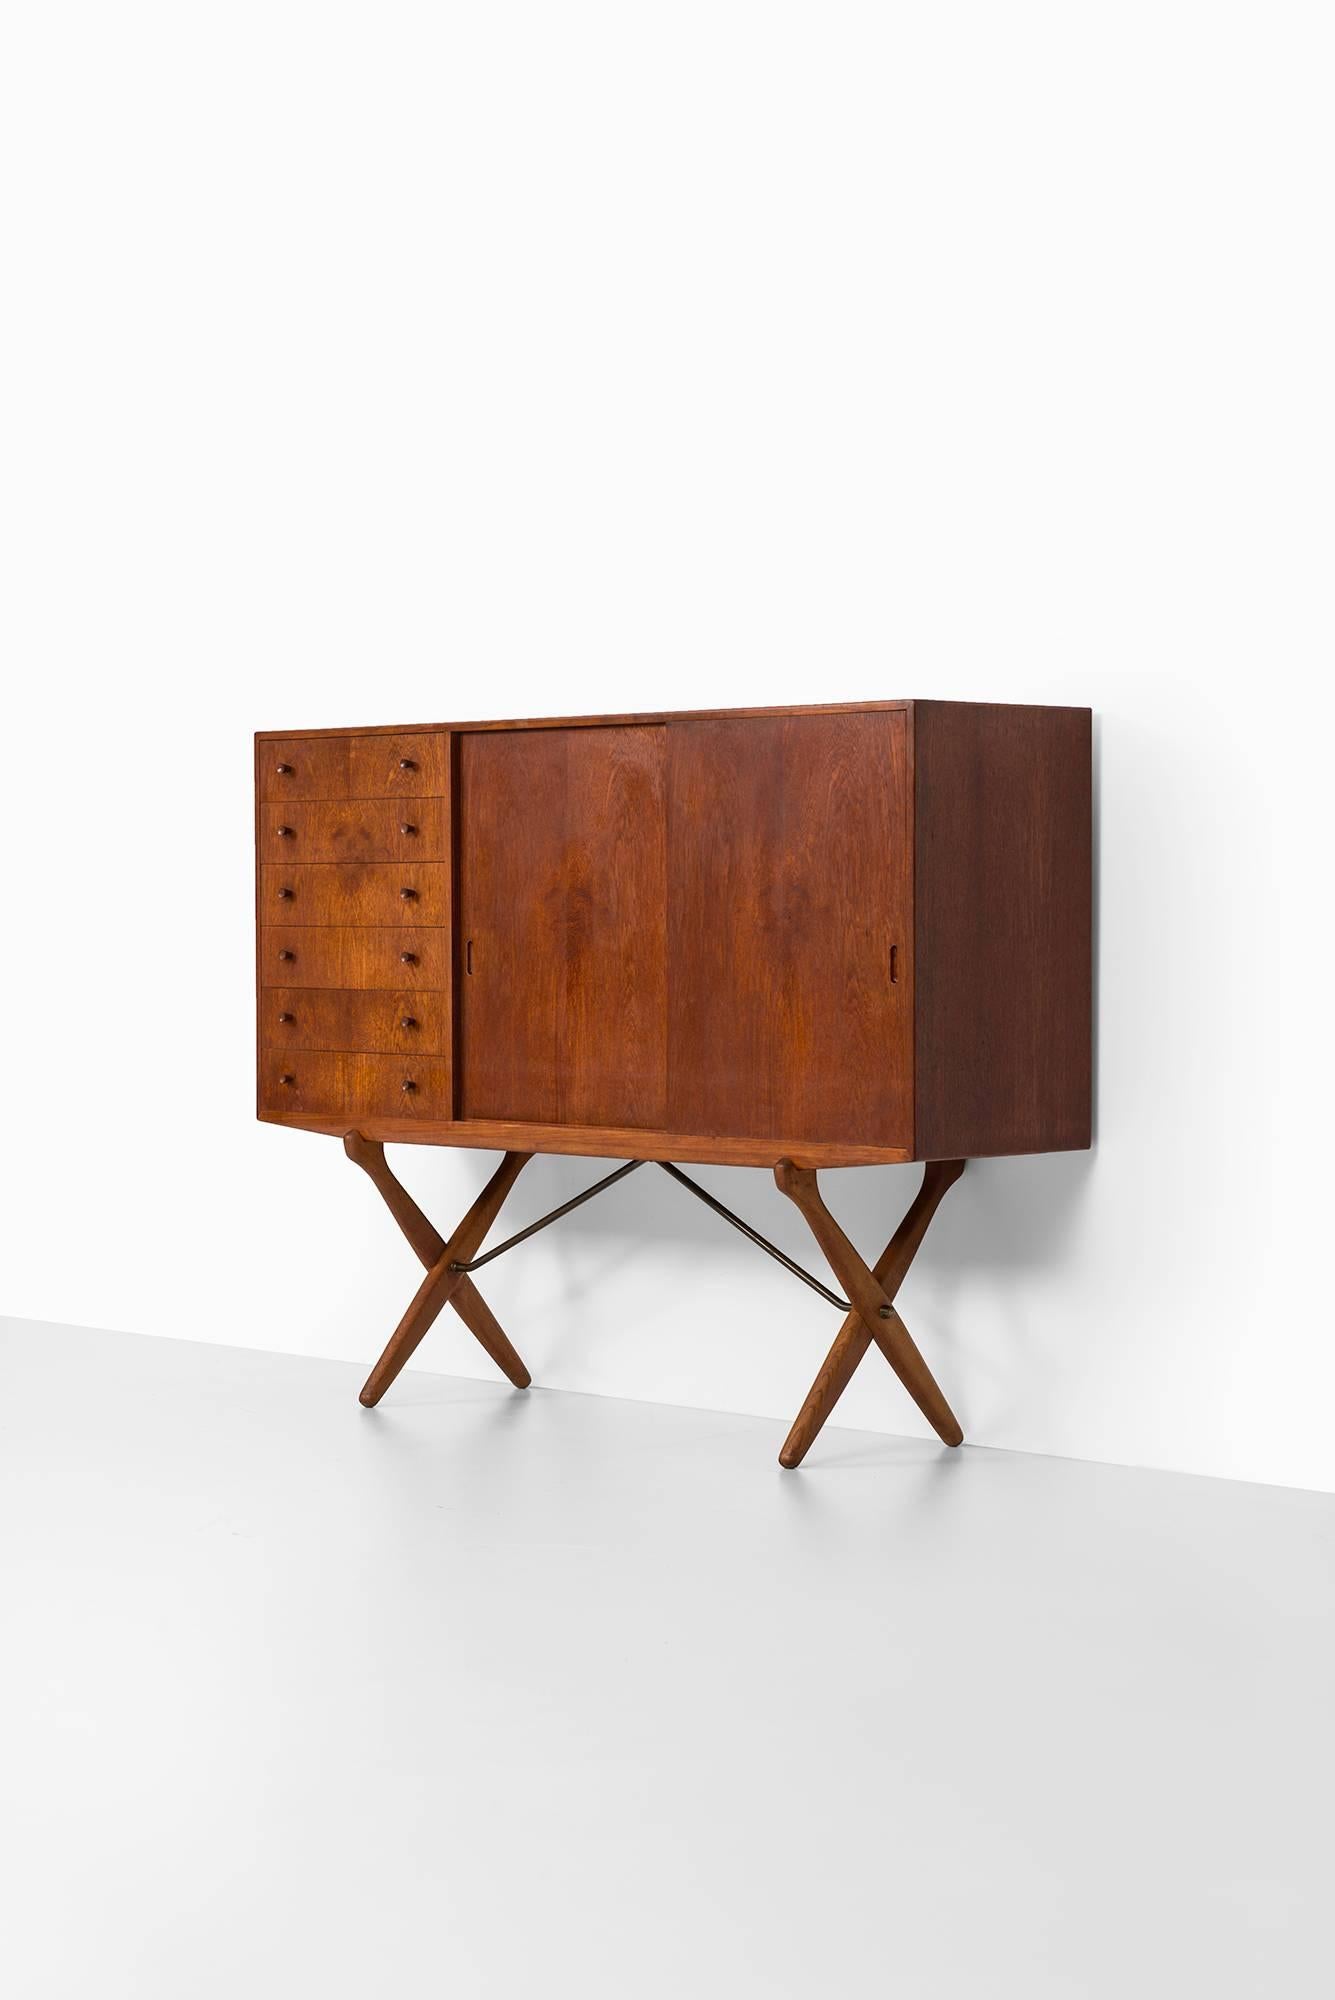 Rare Sideboard Designed by Hans Wegner and Produced by Andreas Tuck in Denmark 3